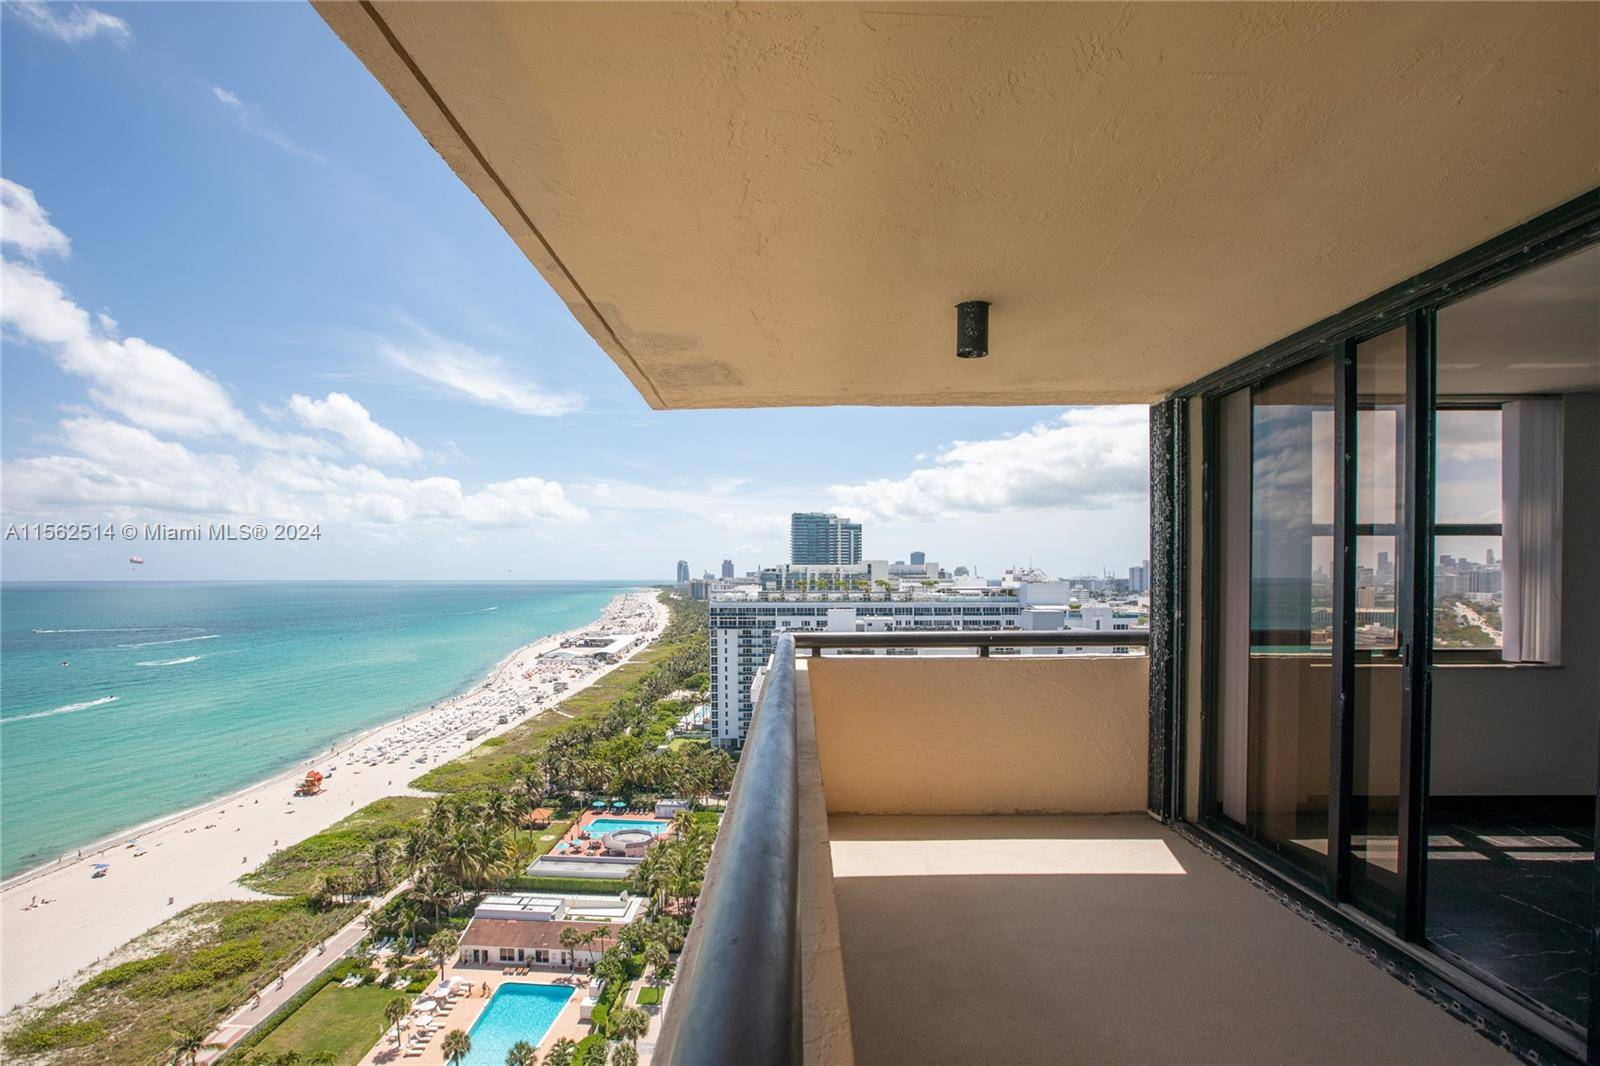 Experience breathtaking direct ocean views, as well as gorgeous city and bay views, from this very unique high floor unit at the prestigious Club Atlantis Condo.